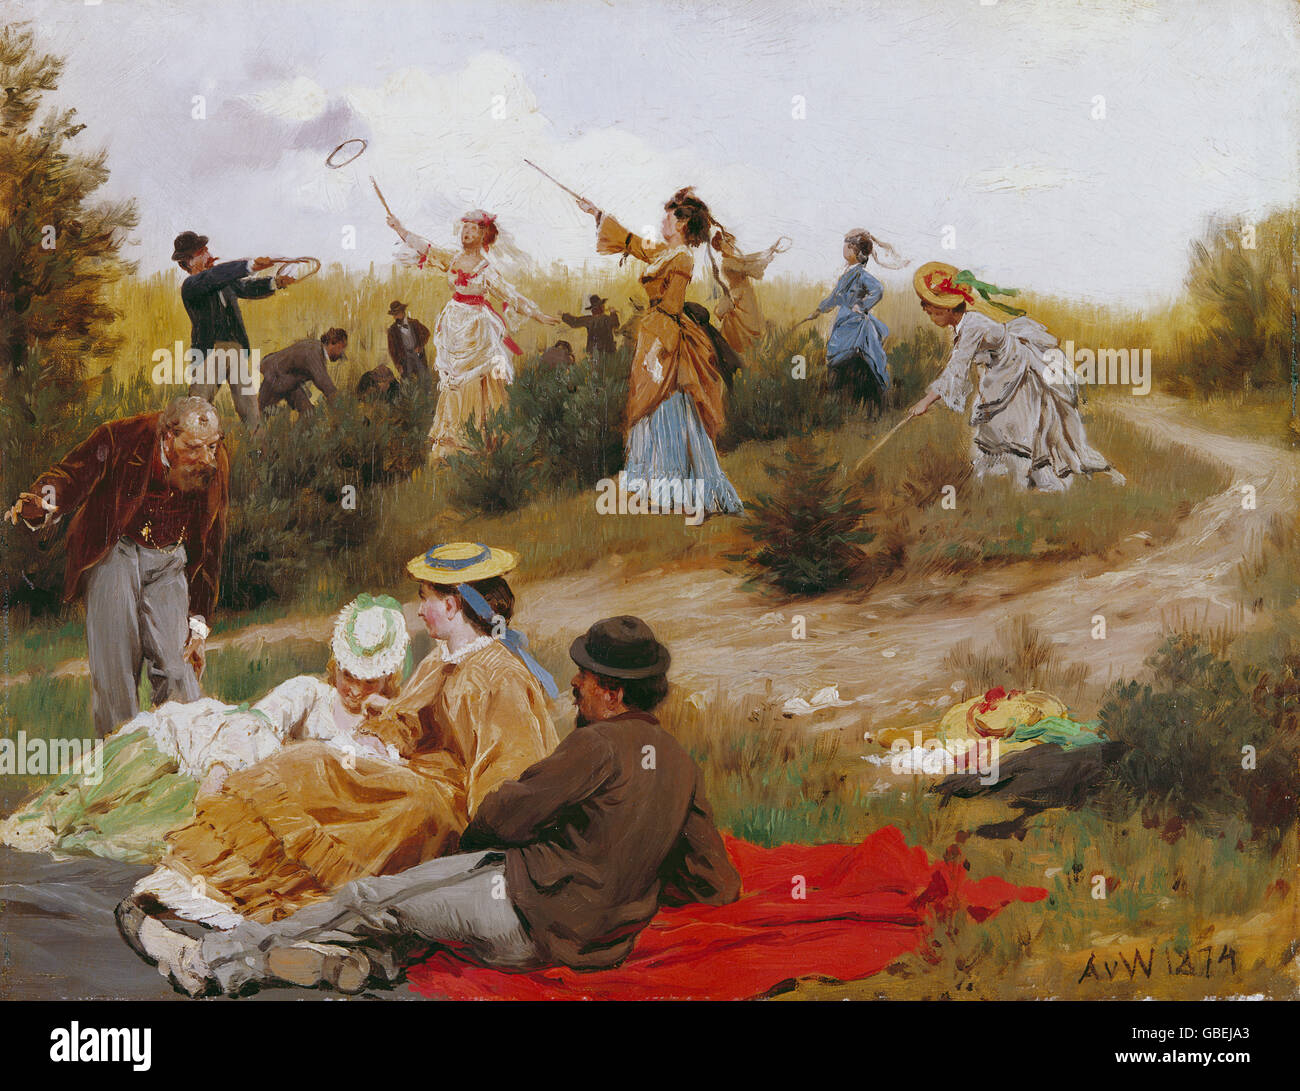 fine arts, Werner, Anton von (1843 - 1915), painting, play, catching rings, 1874, Kunsthalle Mannheim, Germany, Stock Photo